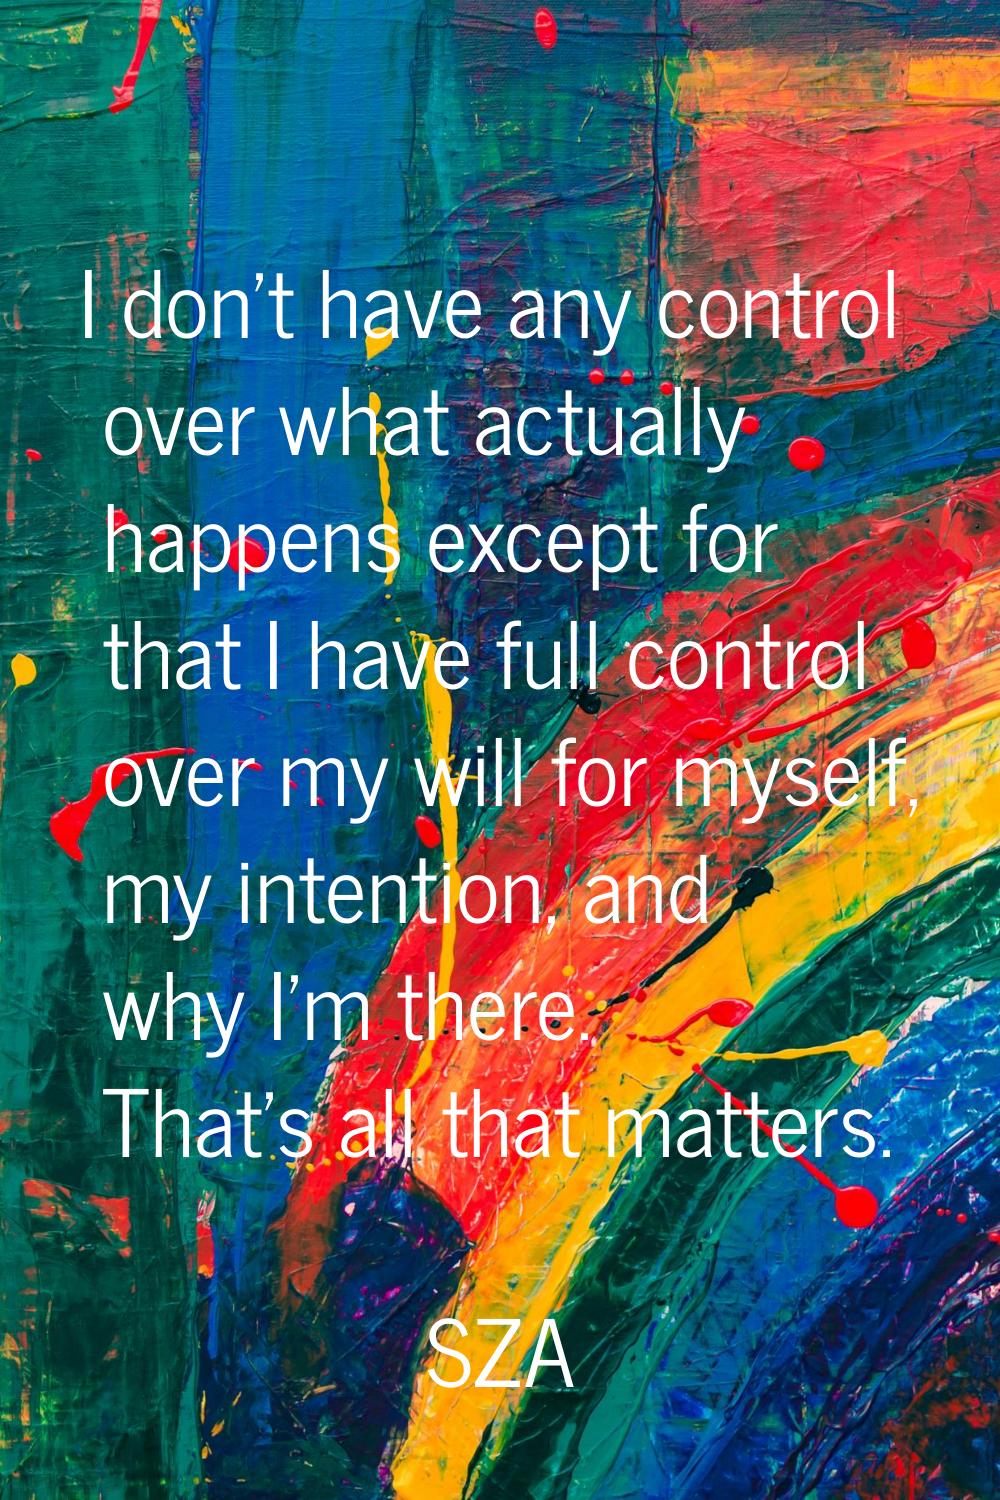 I don't have any control over what actually happens except for that I have full control over my wil